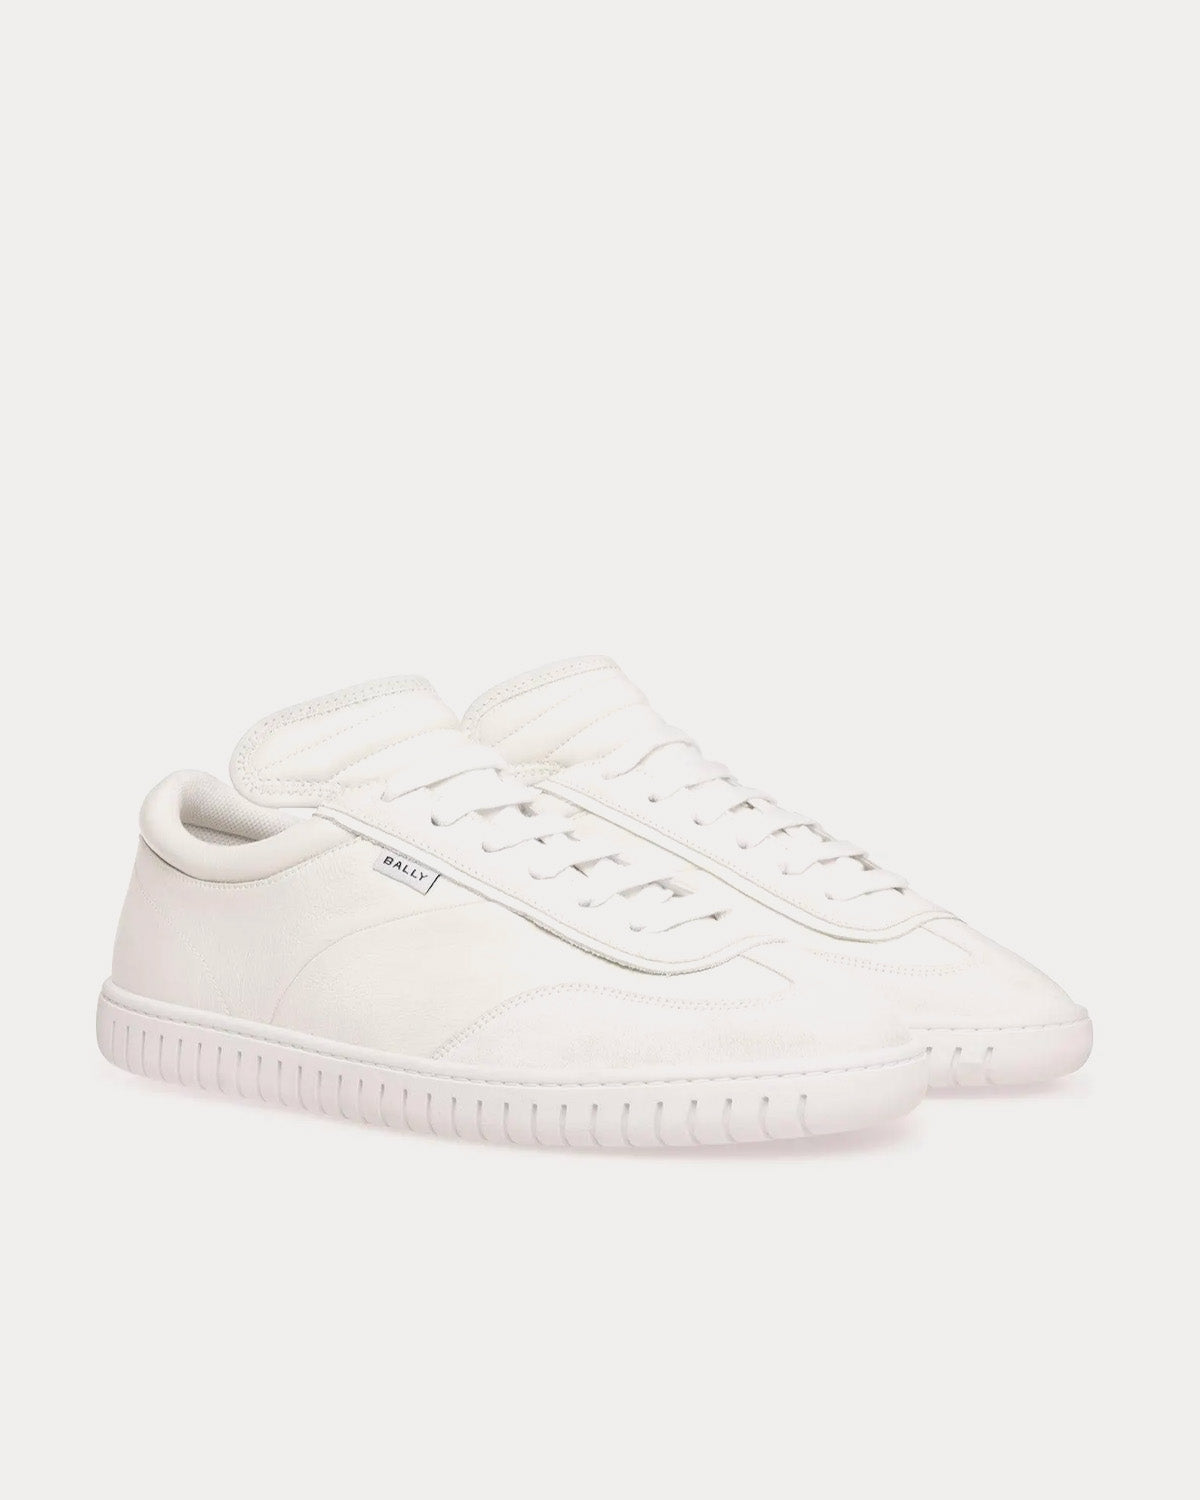 Bally - Player Leather & Suede White Low Top Sneakers